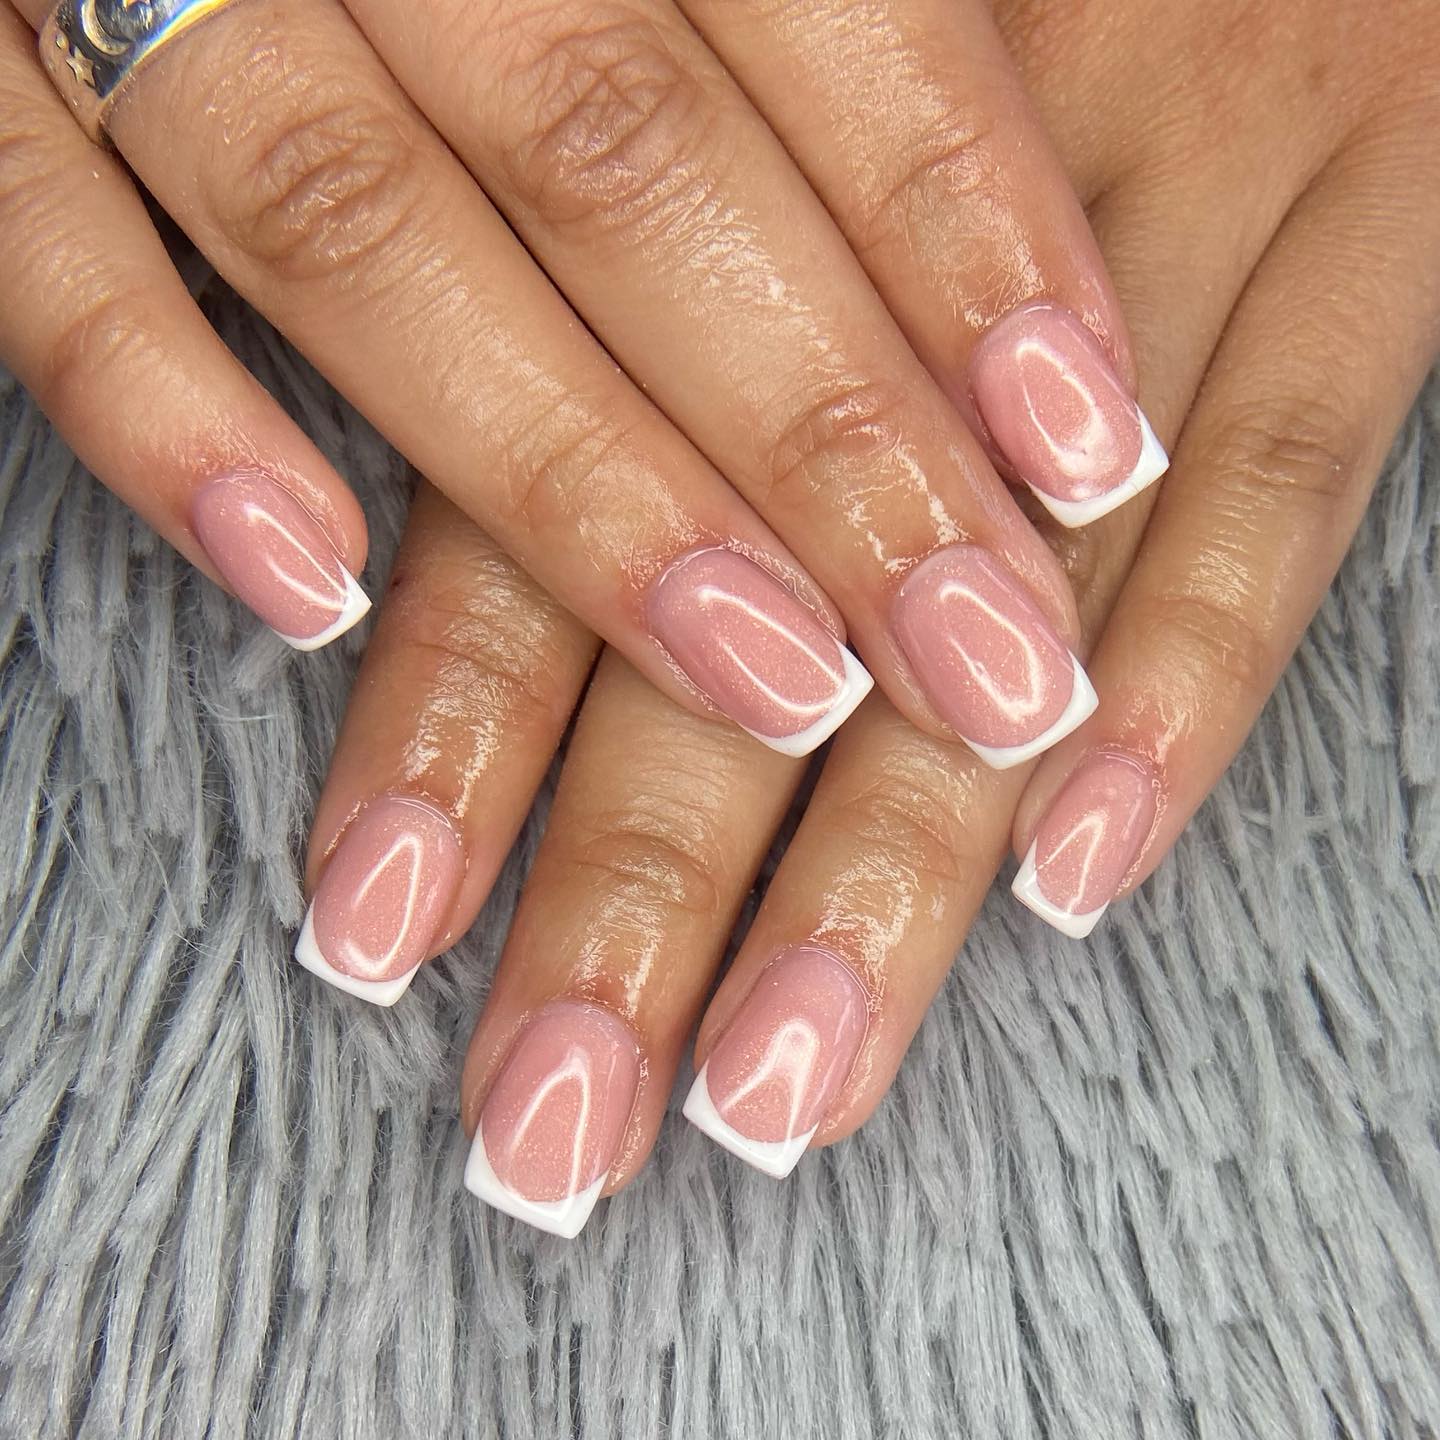 Some women like to shine and glow! Are you one of them? If so, this square girly and shiny mani is the one for you.